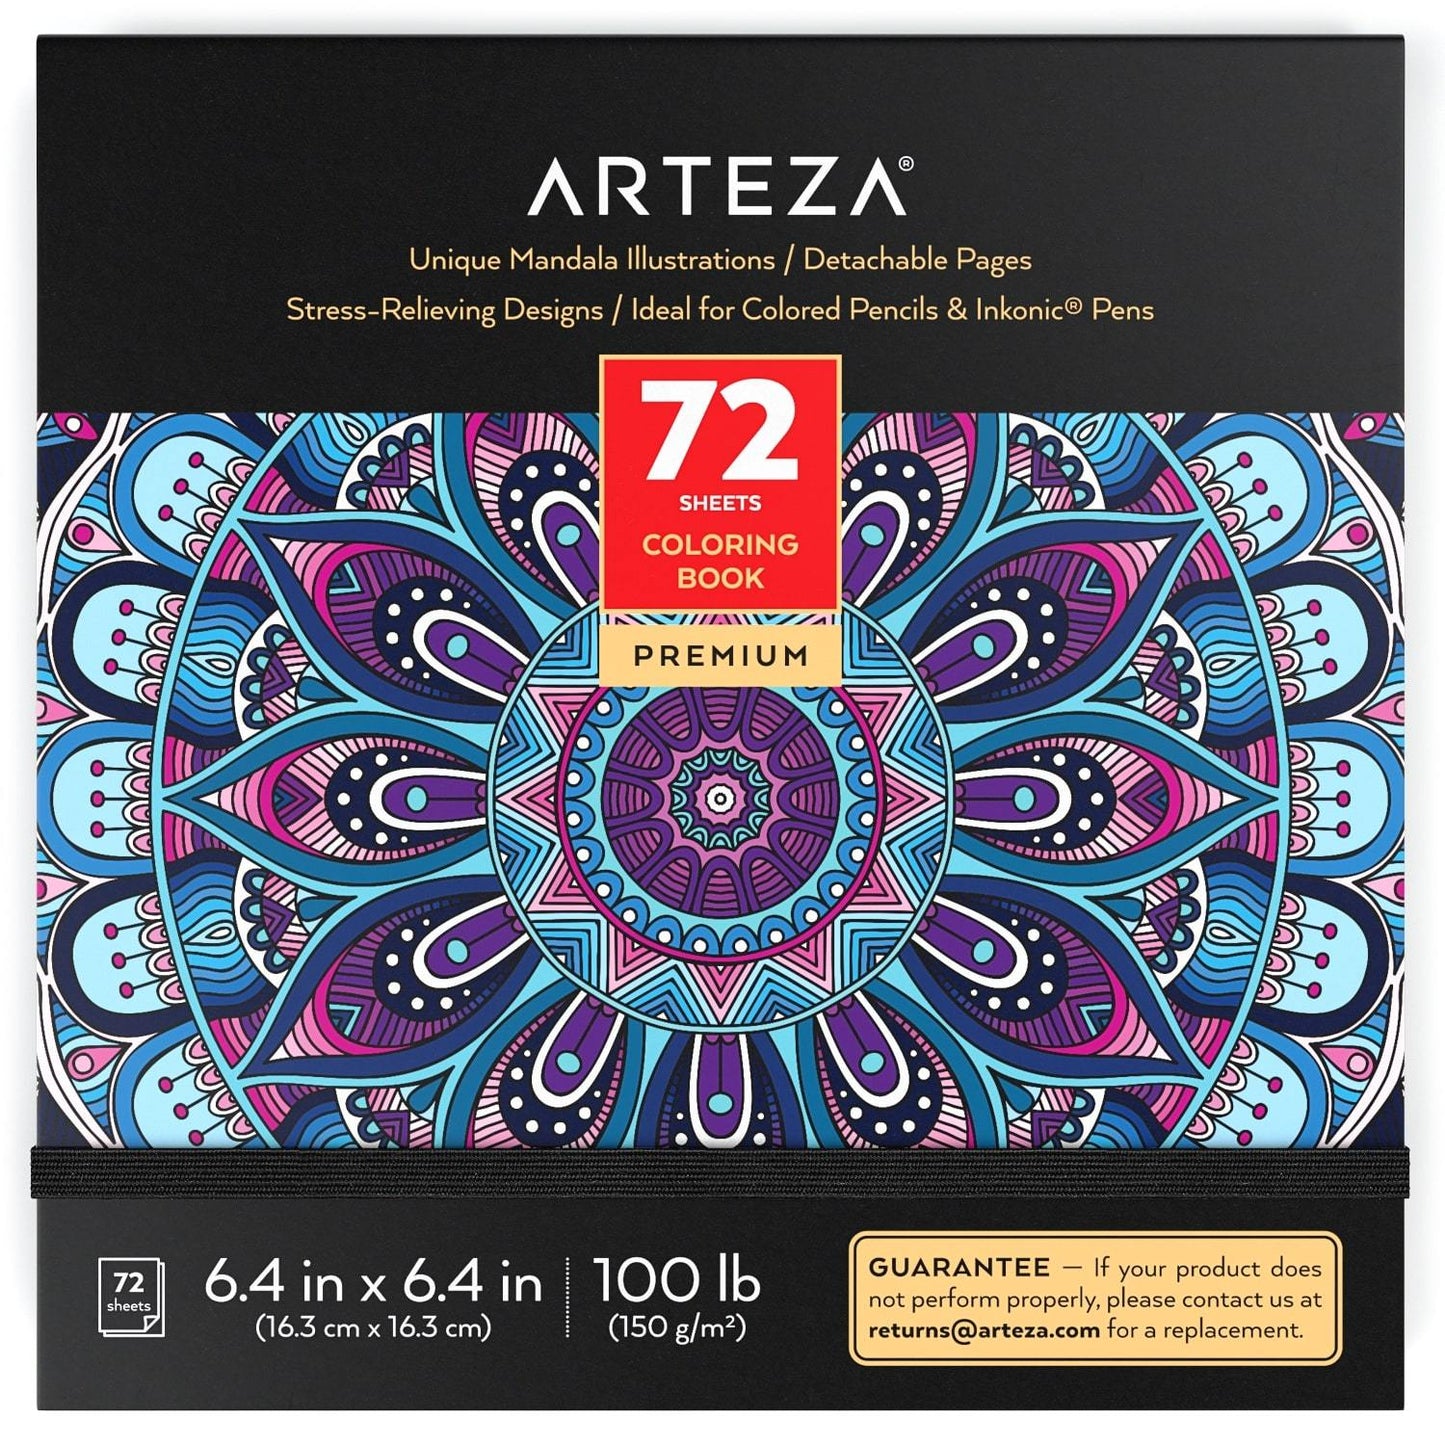 Arteza Adult Coloring Books, Floral & Mandala Designs, 6.4x6.4 Inches - 2  Pack